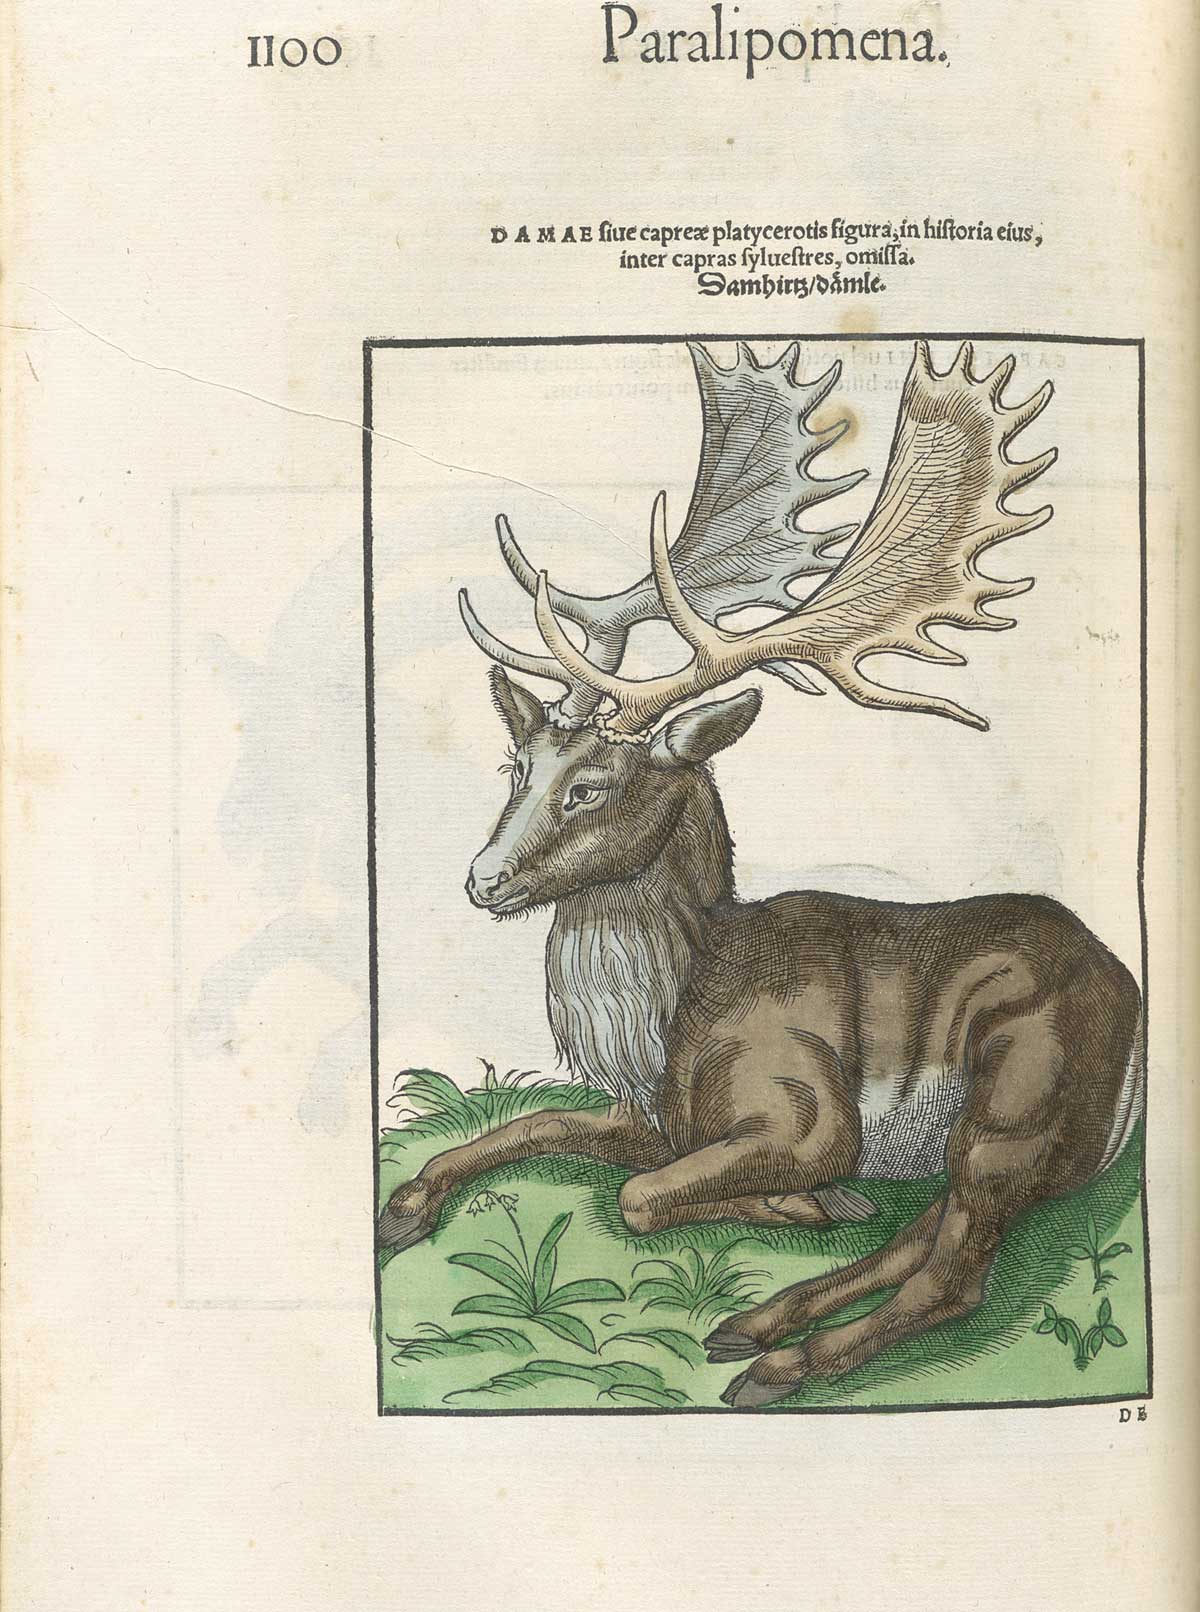 Page 1100 from volume 1 of Conrad Gessner's Conradi Gesneri medici Tigurini Historiae animalium, featuring the hand-colored woodcut of a fallow deer lying on the ground.